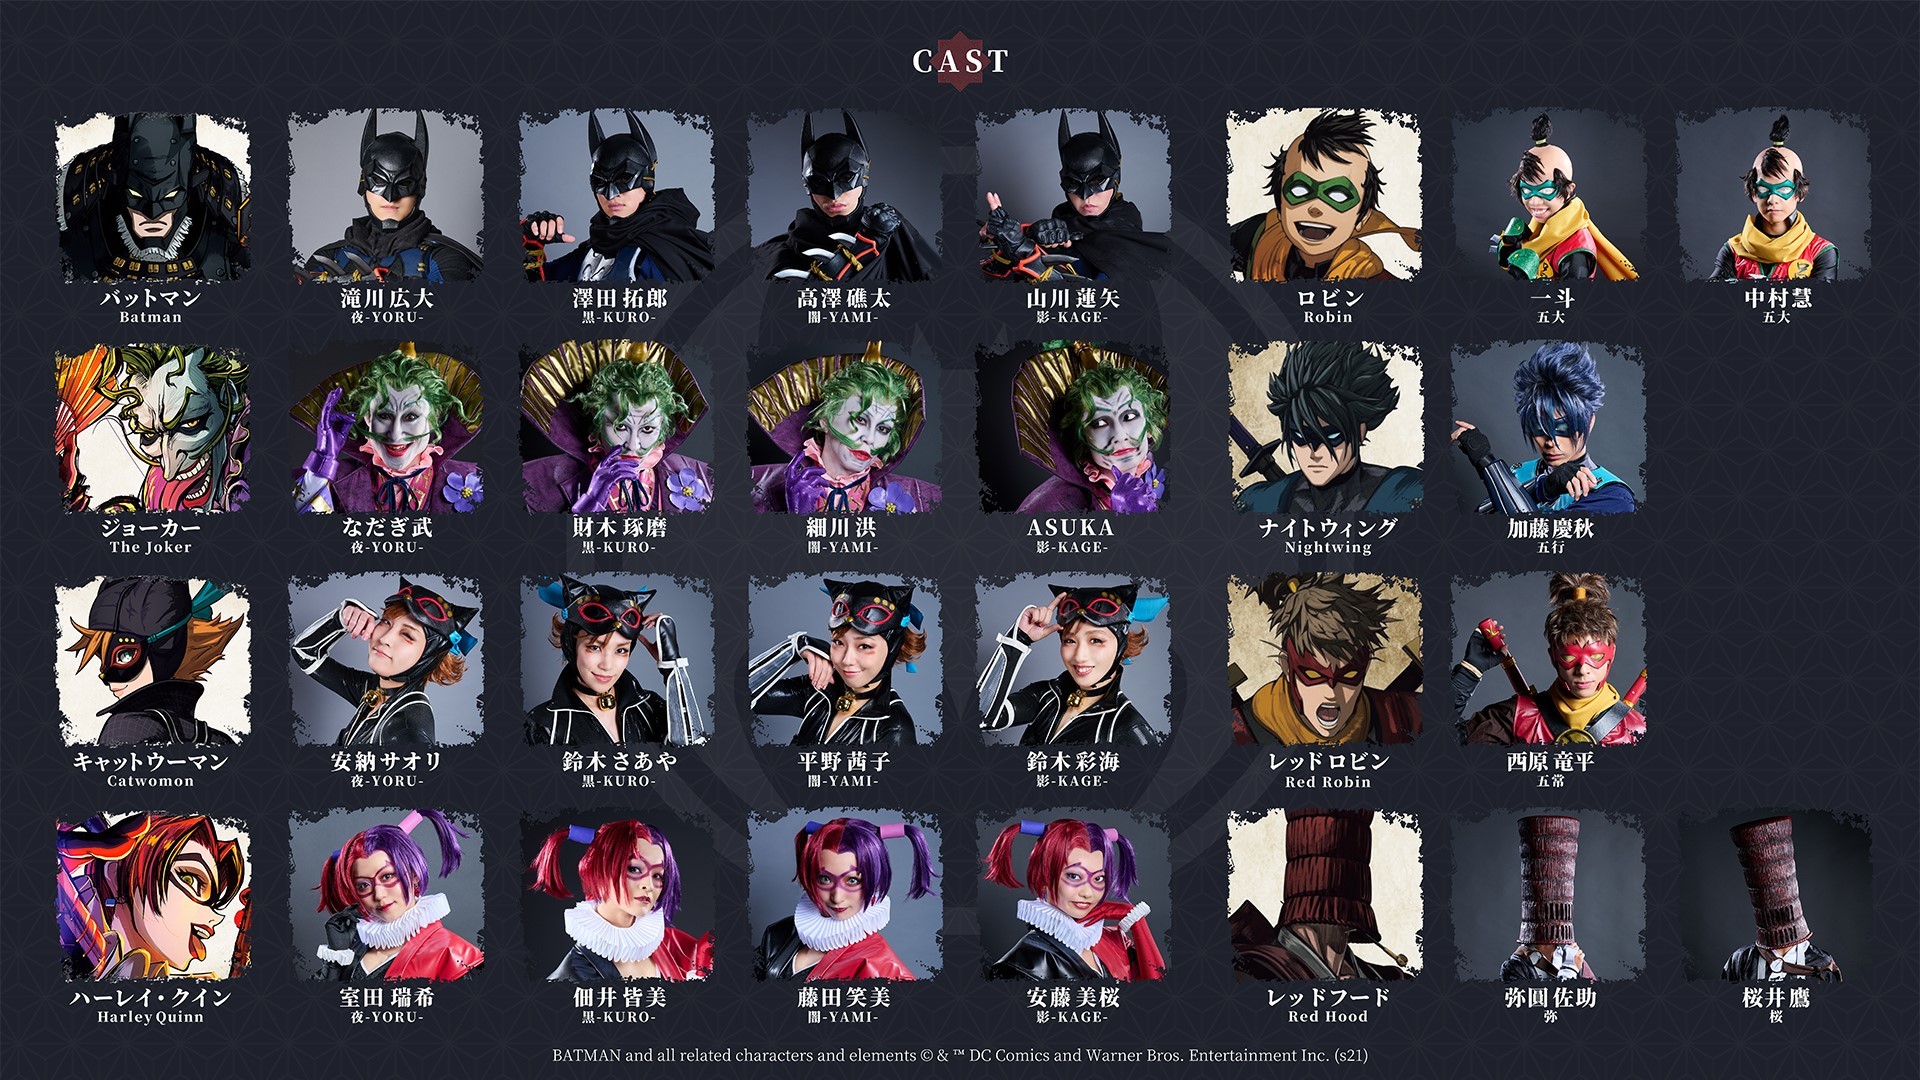 Batman and all related characters and elements are trademarks of and （C） DC Comics. （C）Warner Bros. Japan LLC